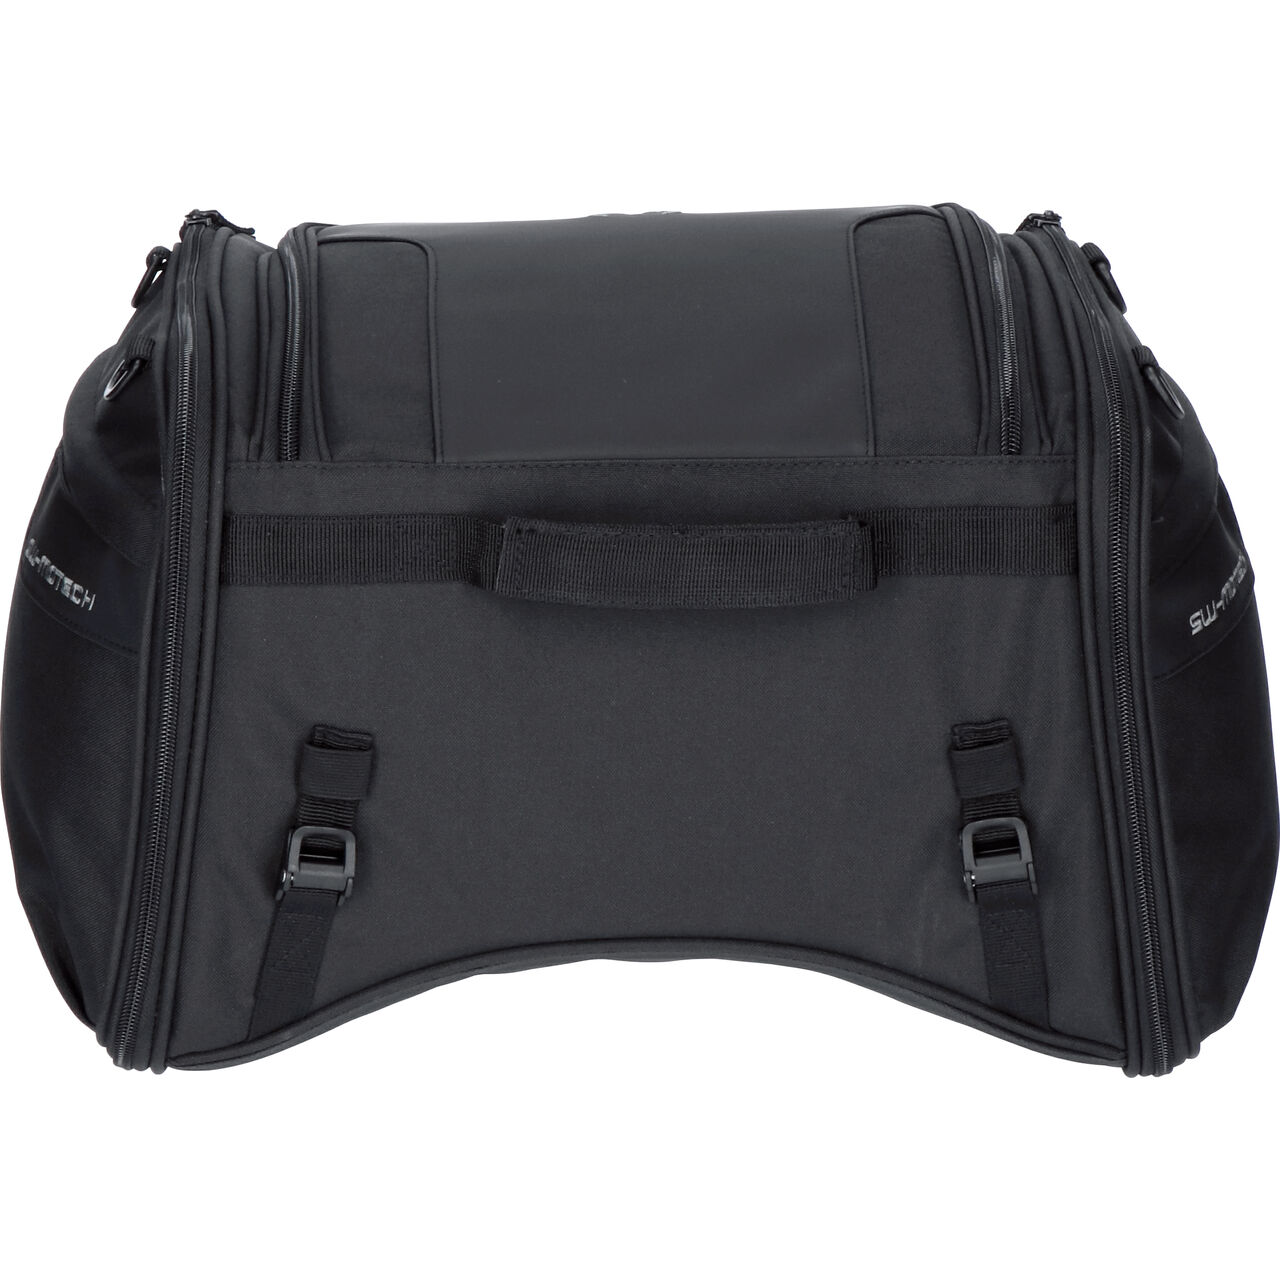 ION M tail bag for motorcycle - SW-MOTECH